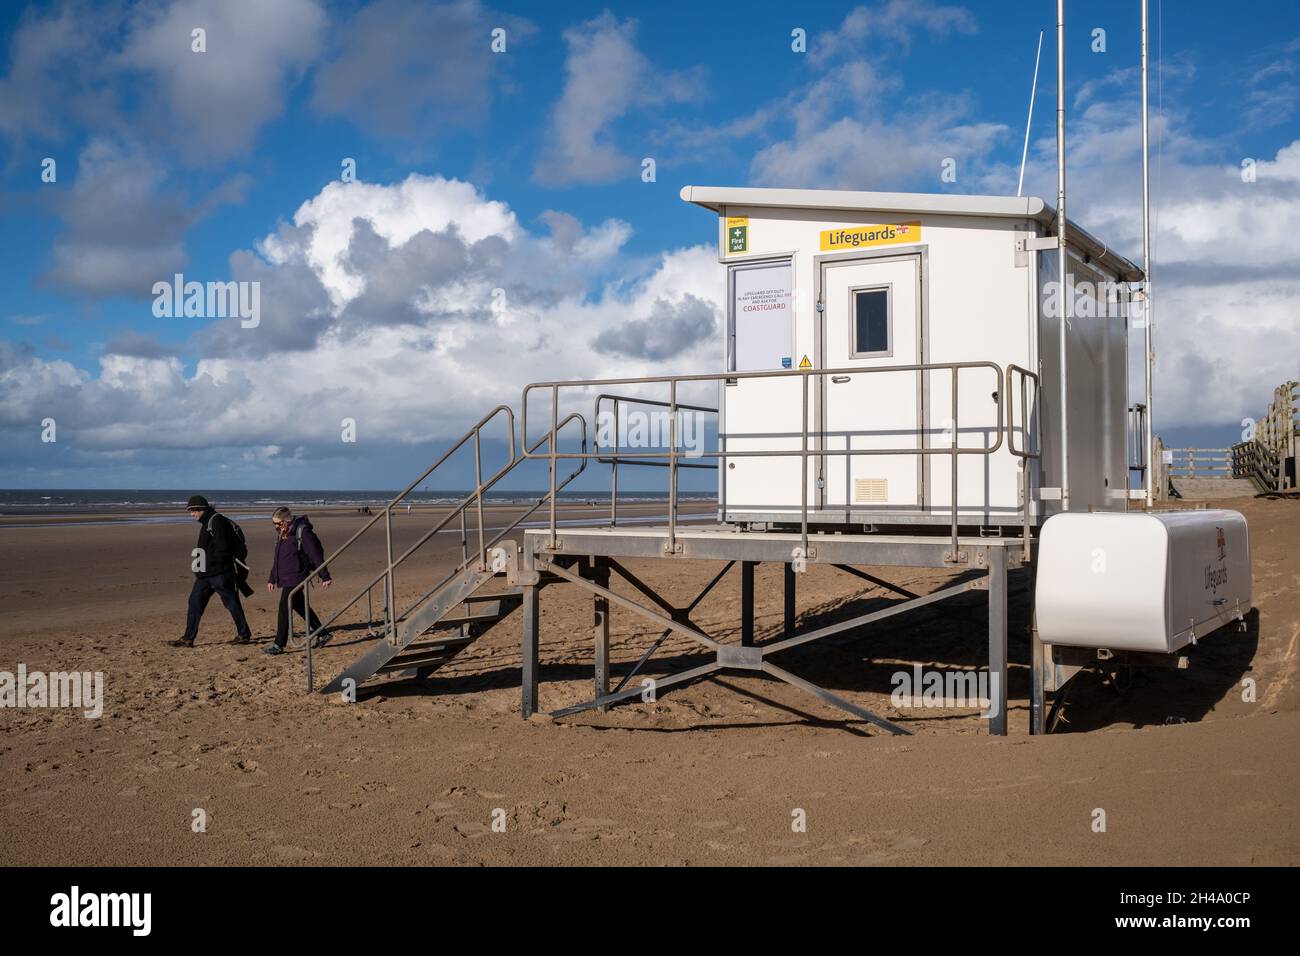 Lifeguards hut on the beach with 2 people walking past wearing winter coats Stock Photo